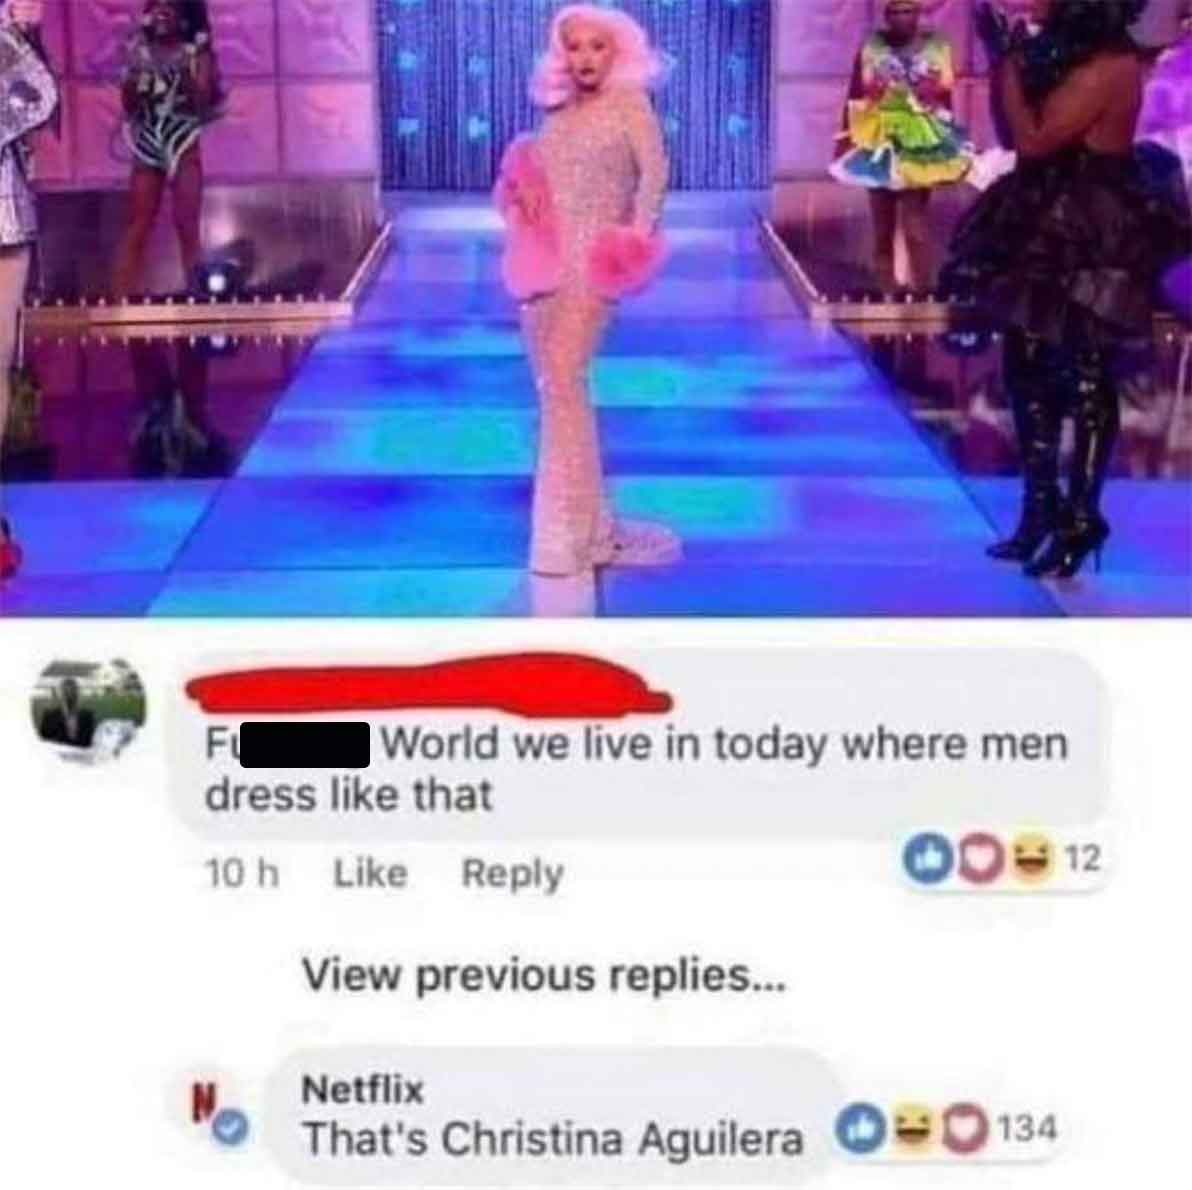 that's christina aguilera - N Fu World we live in today where men dress that 10 h View previous replies... Netflix 00012 That's Christina Aguilera 134